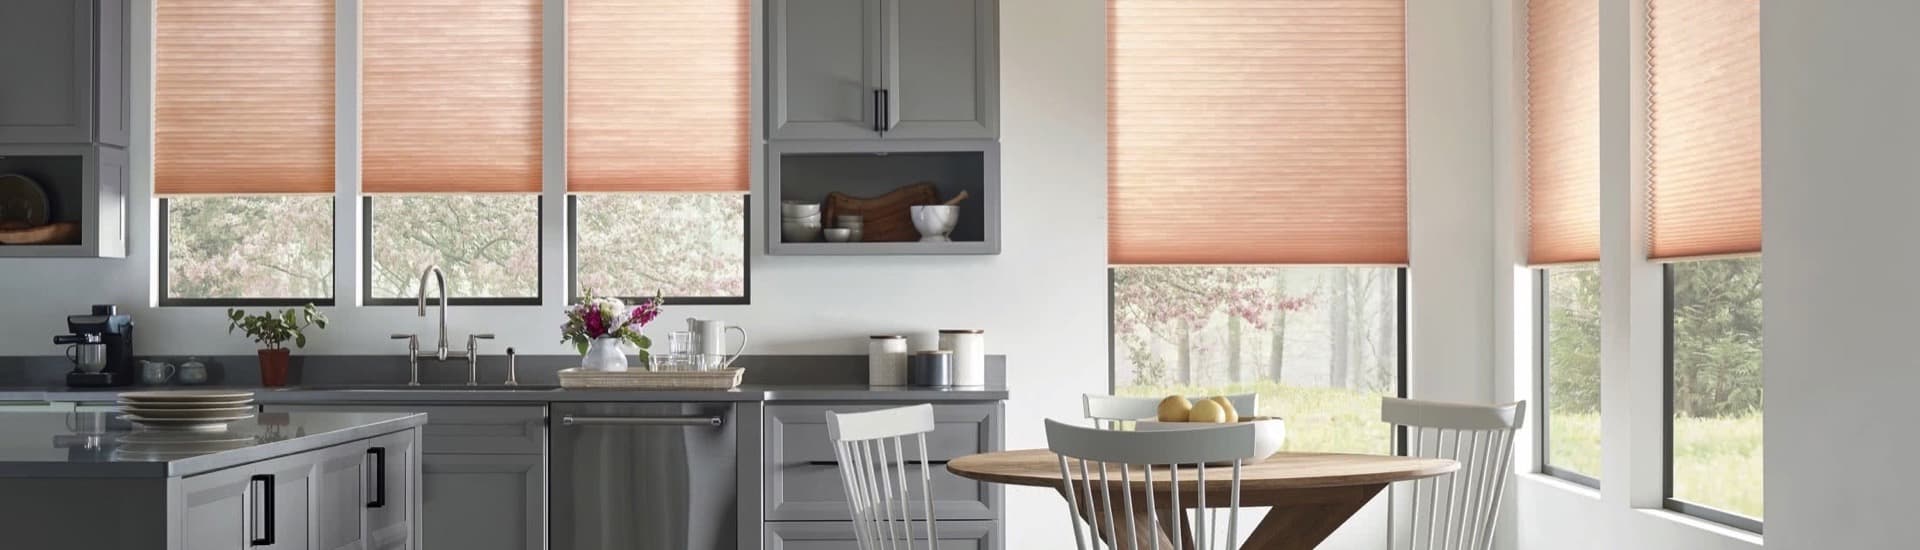 Applause Honeycomb Shades with Powerview Motorization